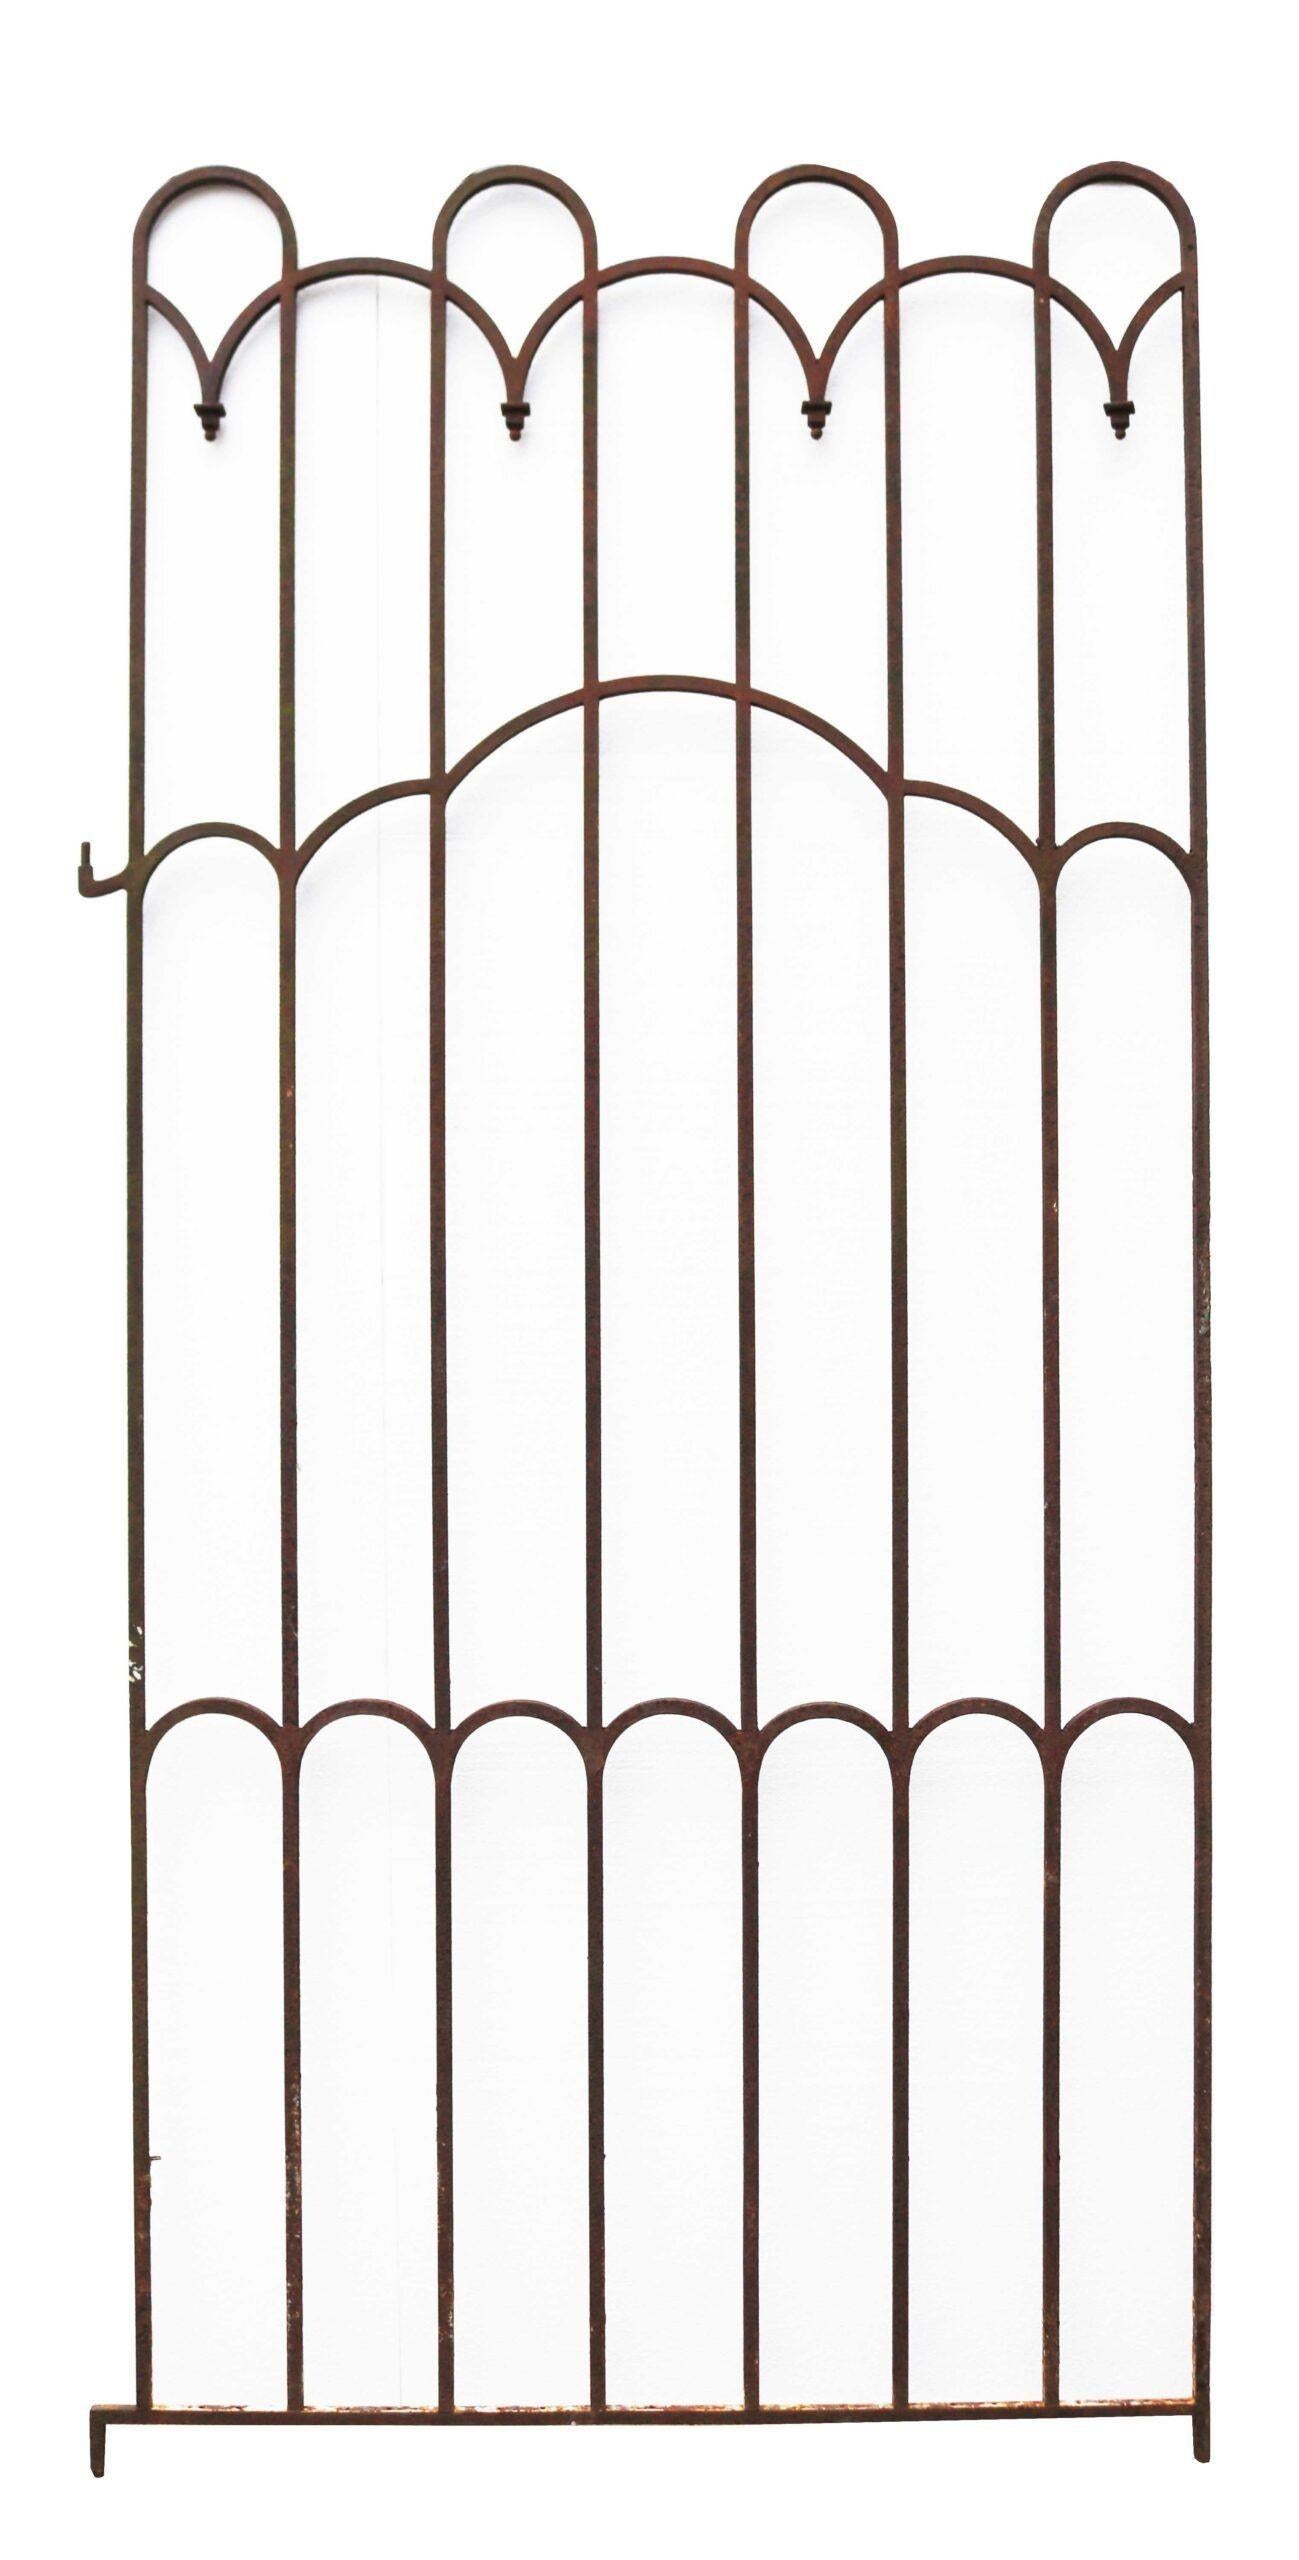 Antique Wrought Iron Panel or Gate In Good Condition For Sale In Wormelow, Herefordshire